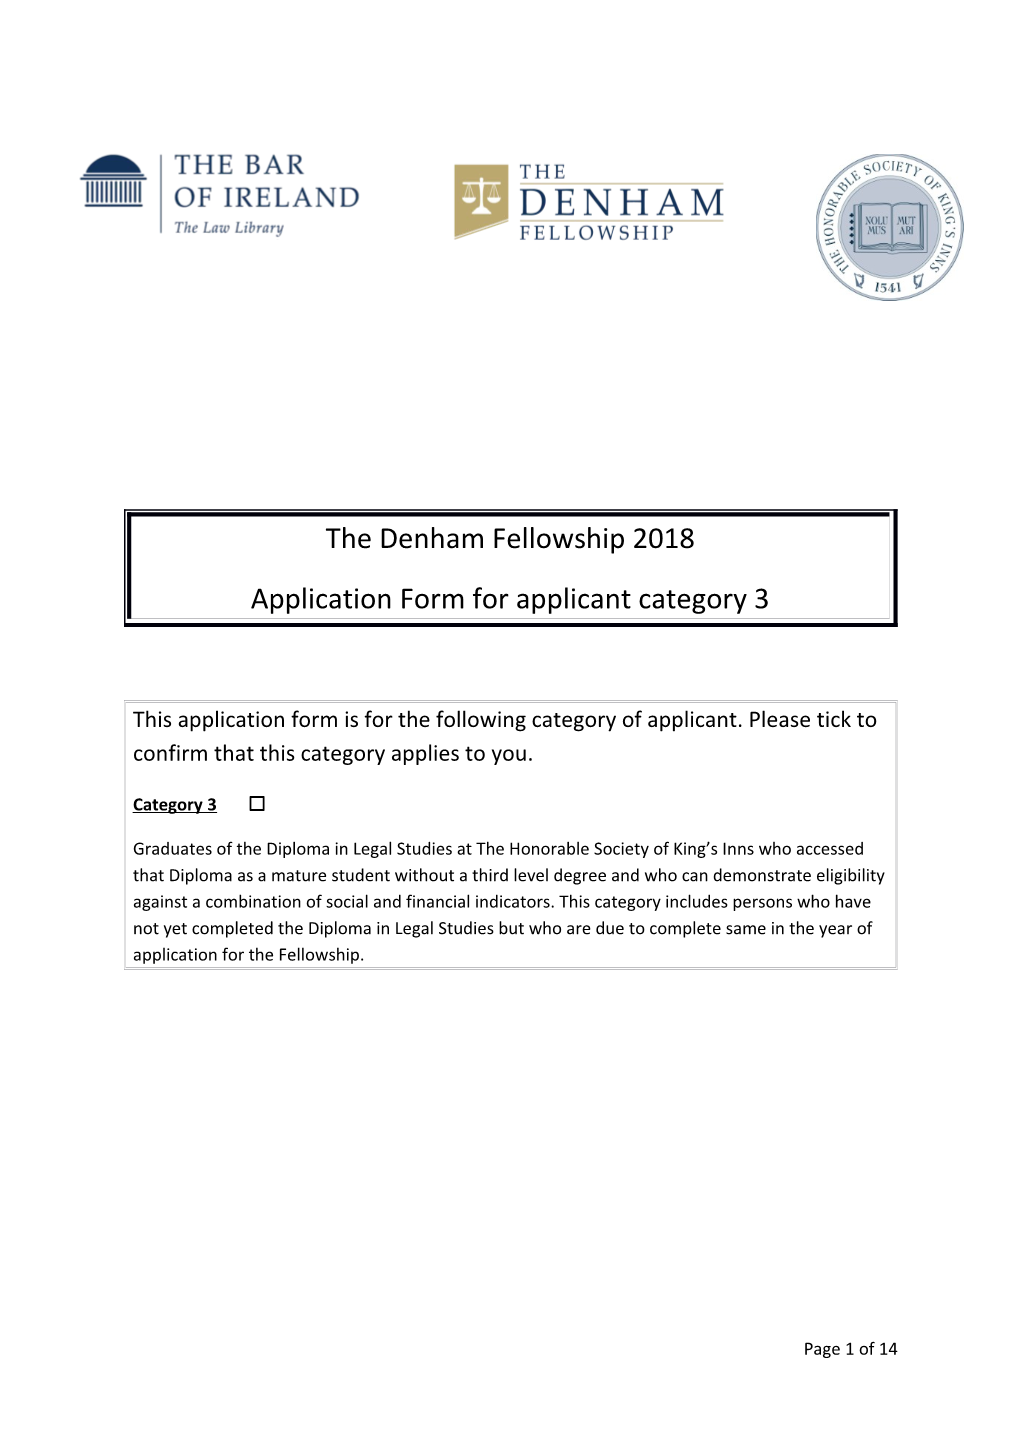 Application Form for Applicant Category 3